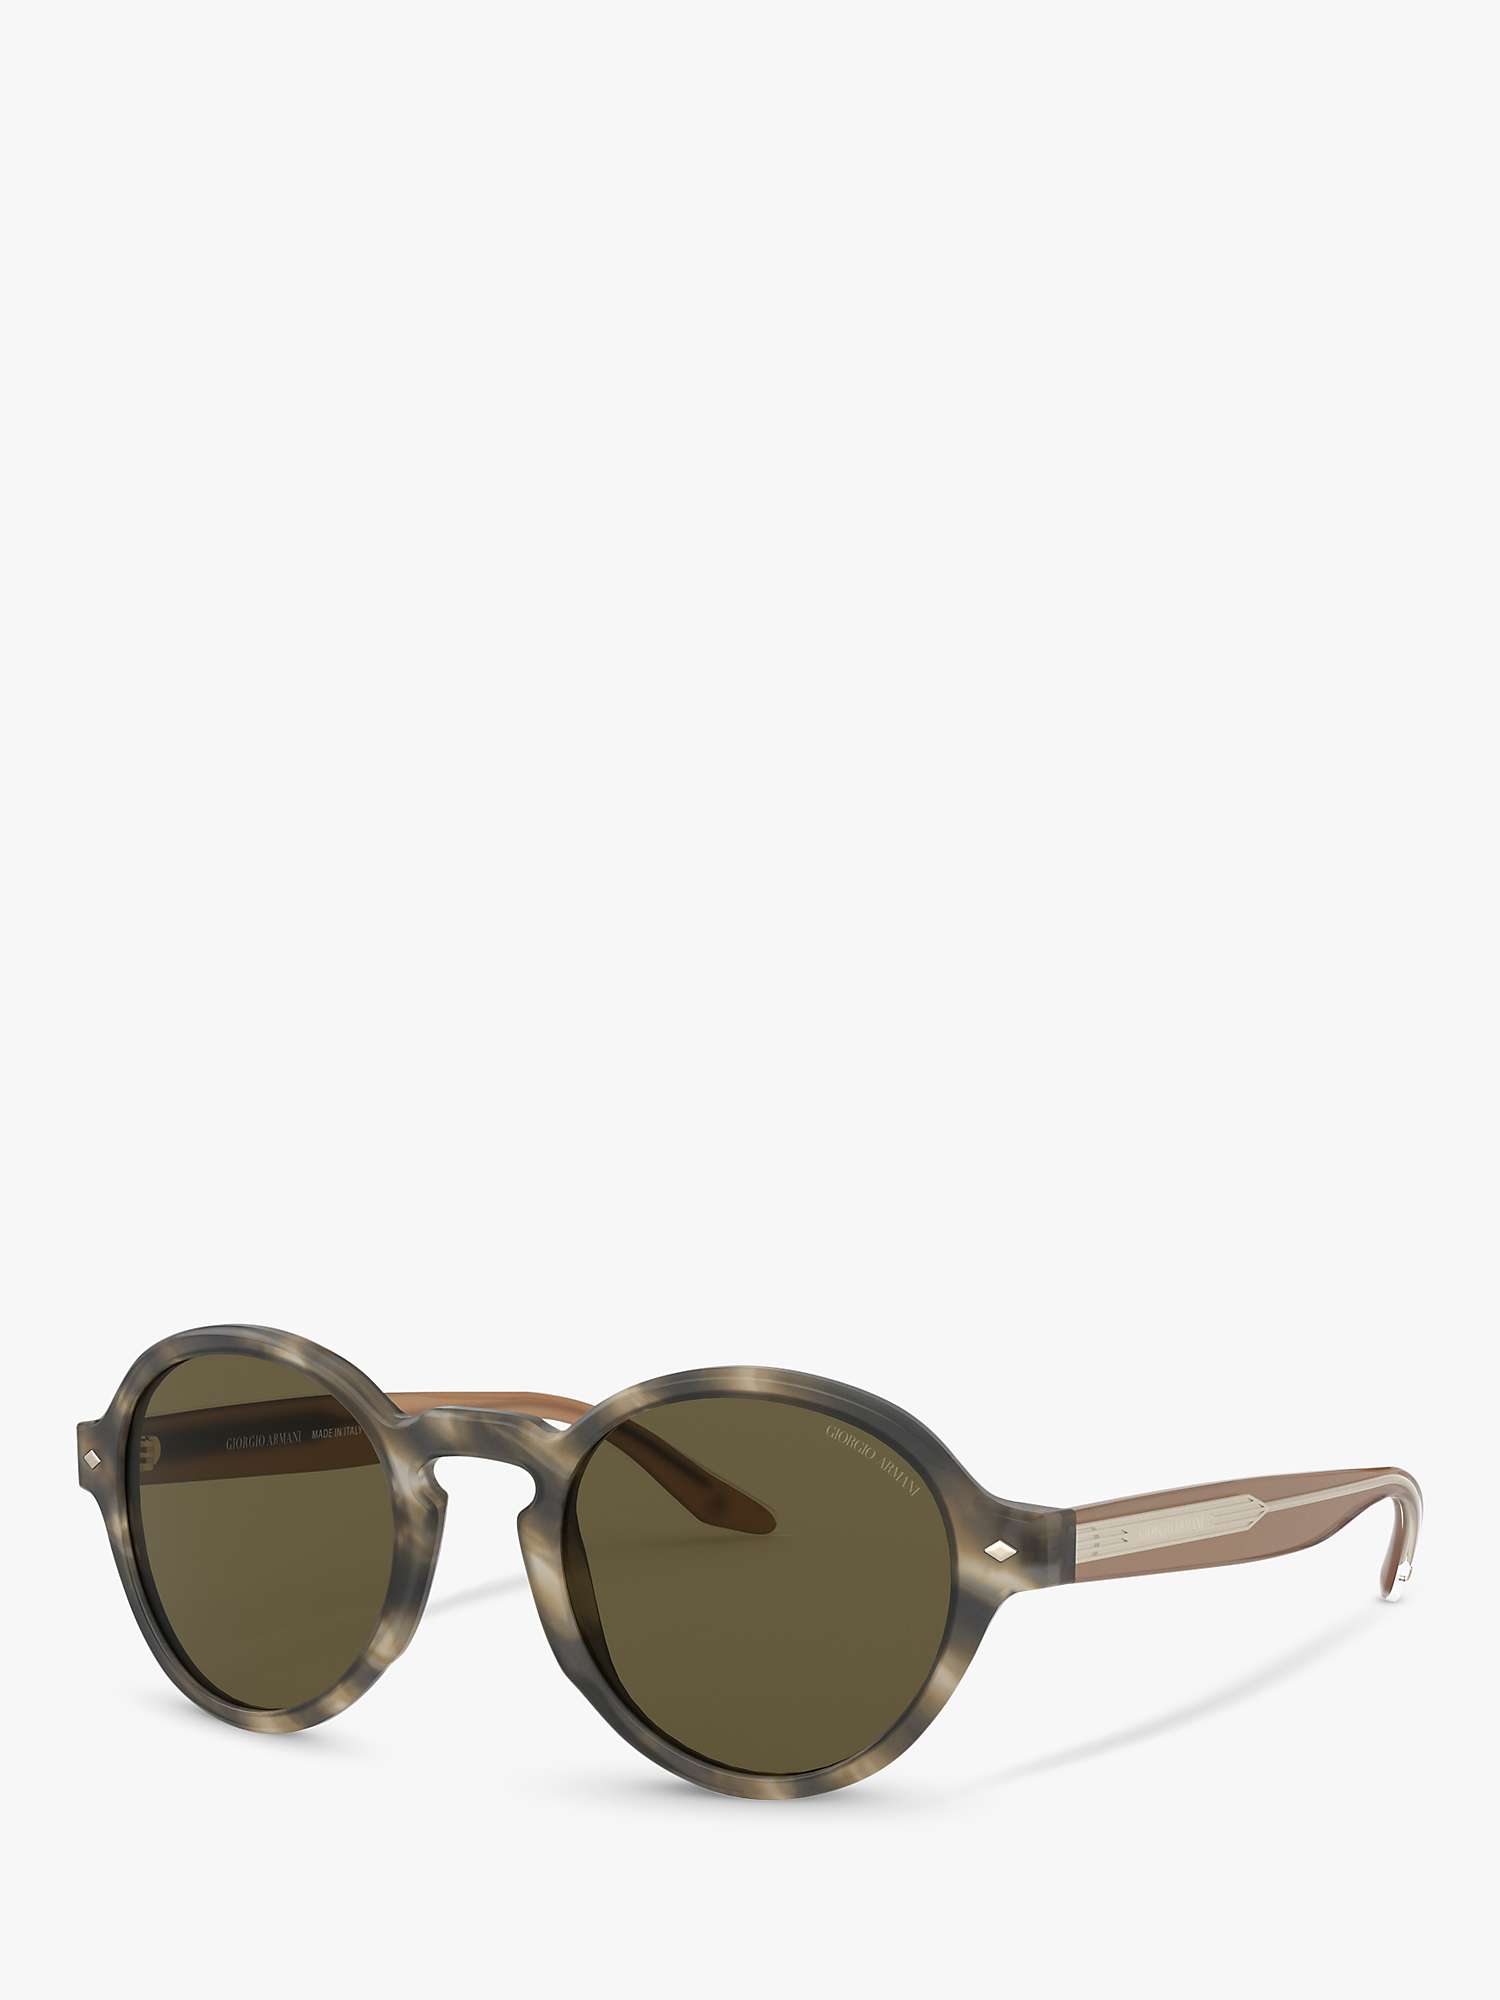 Buy Emporio Armani AR8130 Men's Oval Sunglasses, Striped Brown/Brown Online at johnlewis.com